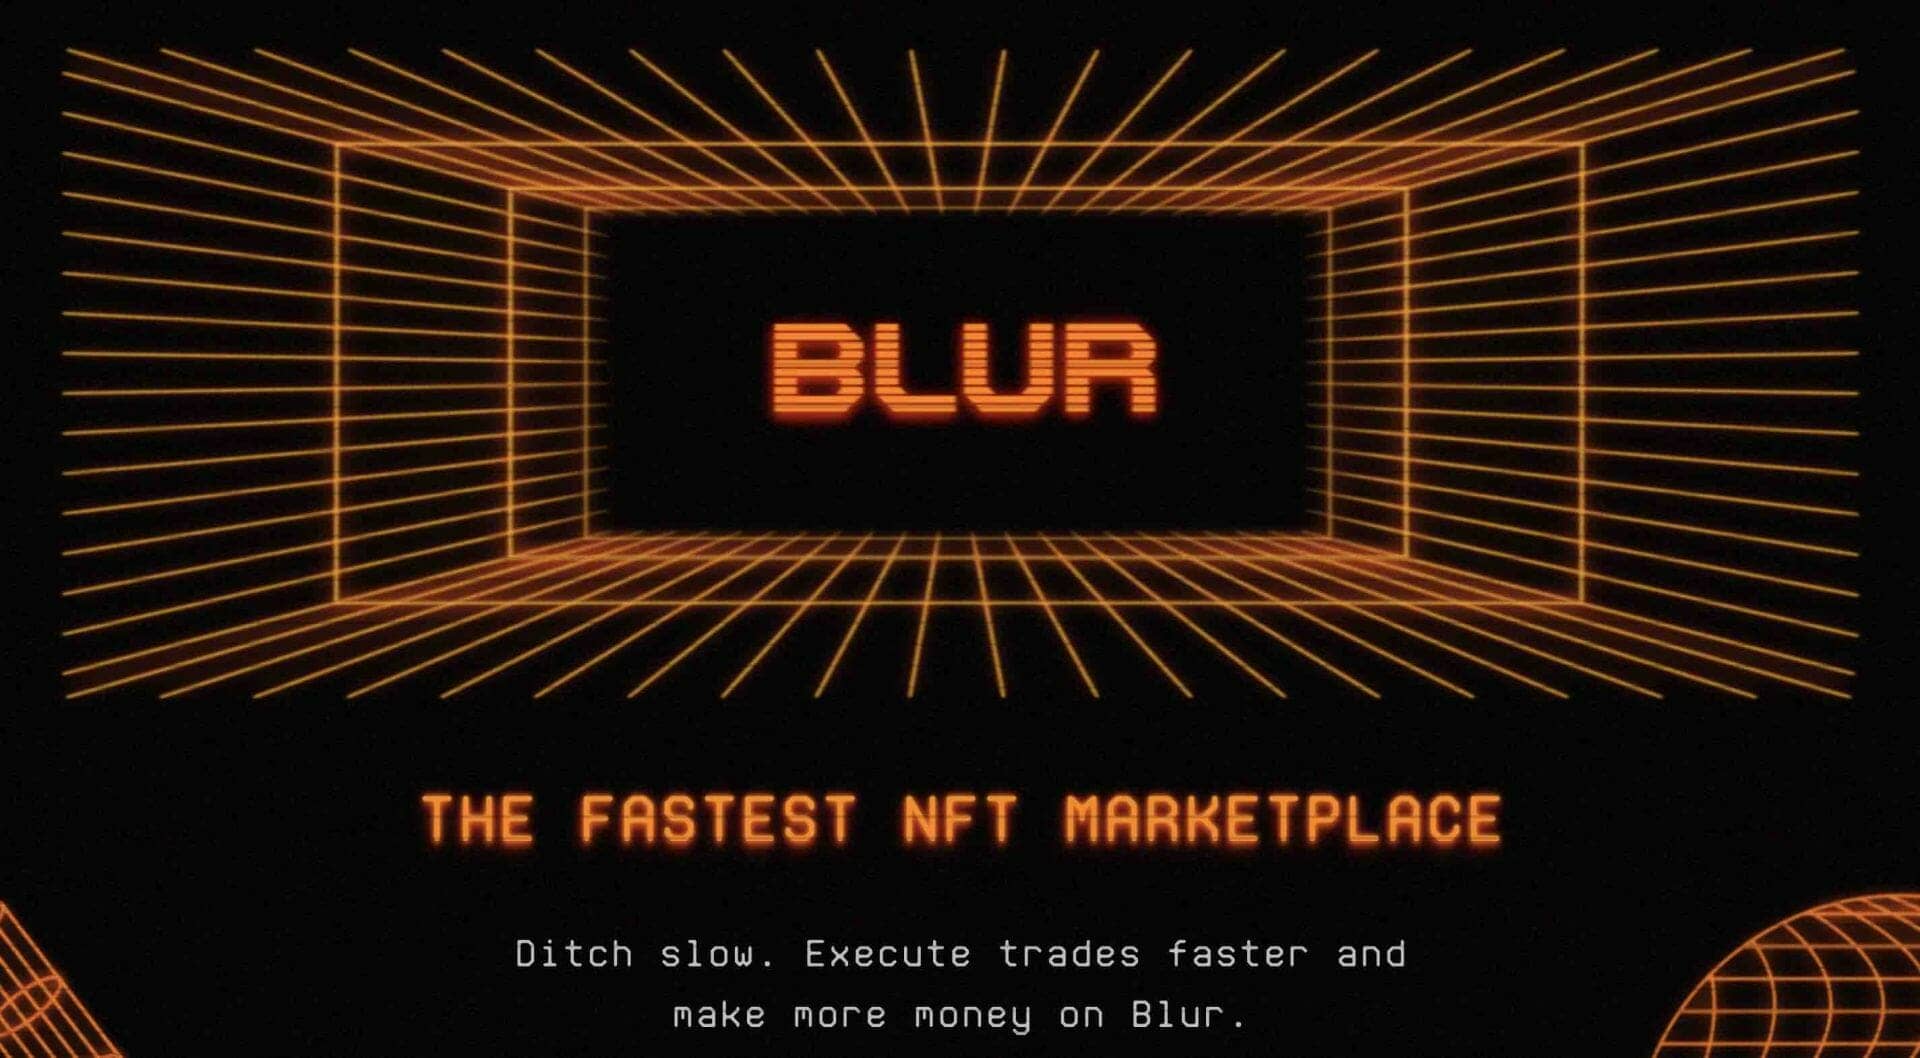 Presentation page of the new Blur professional marketplace.